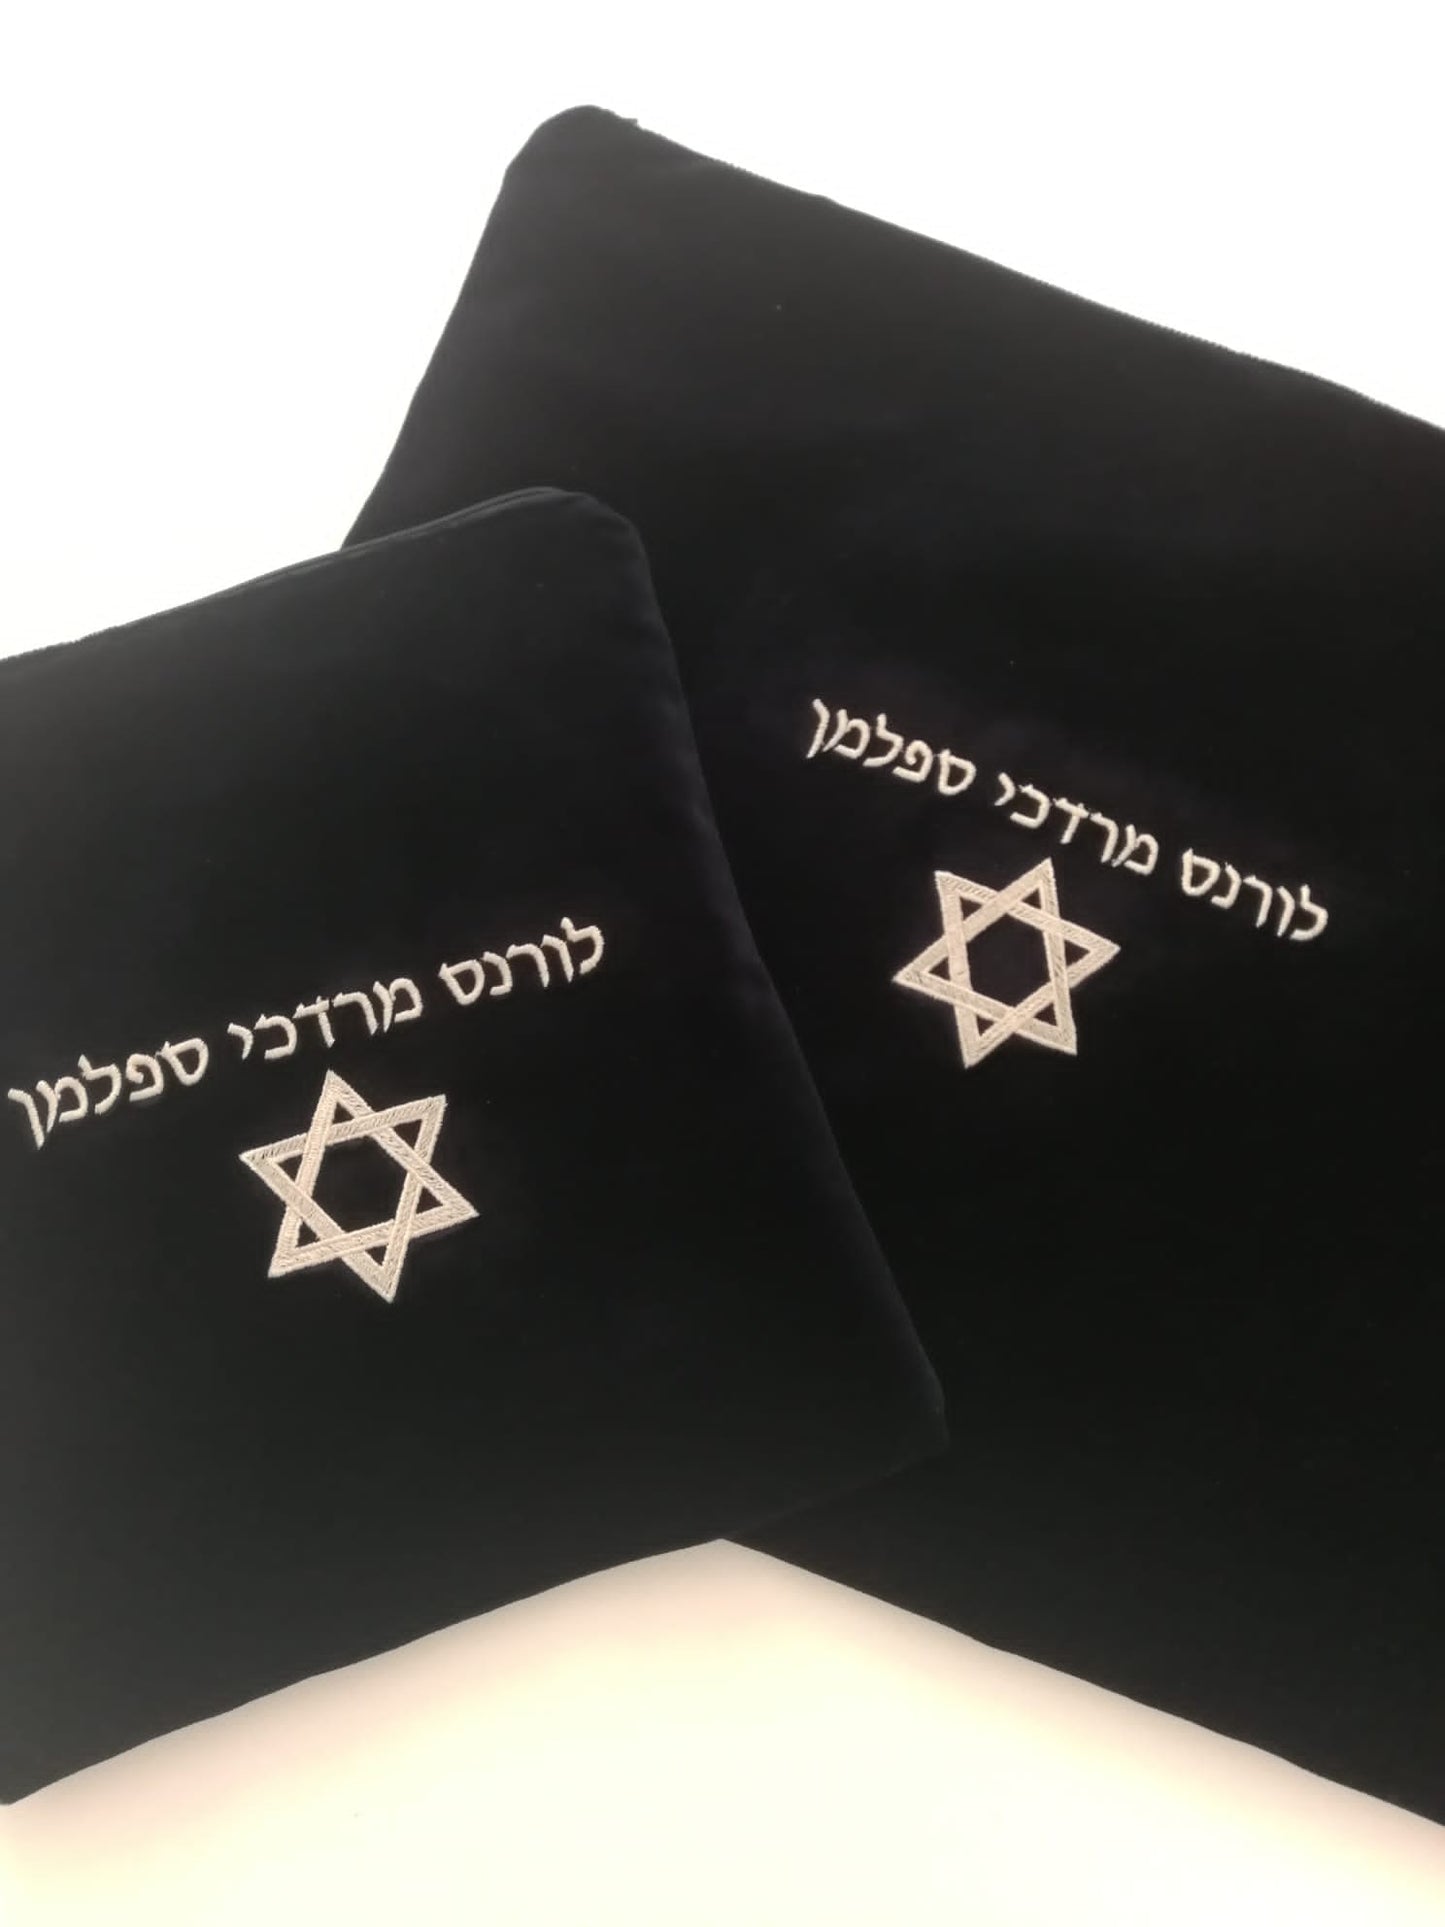 Tefillin bag made out of limited edition textiles